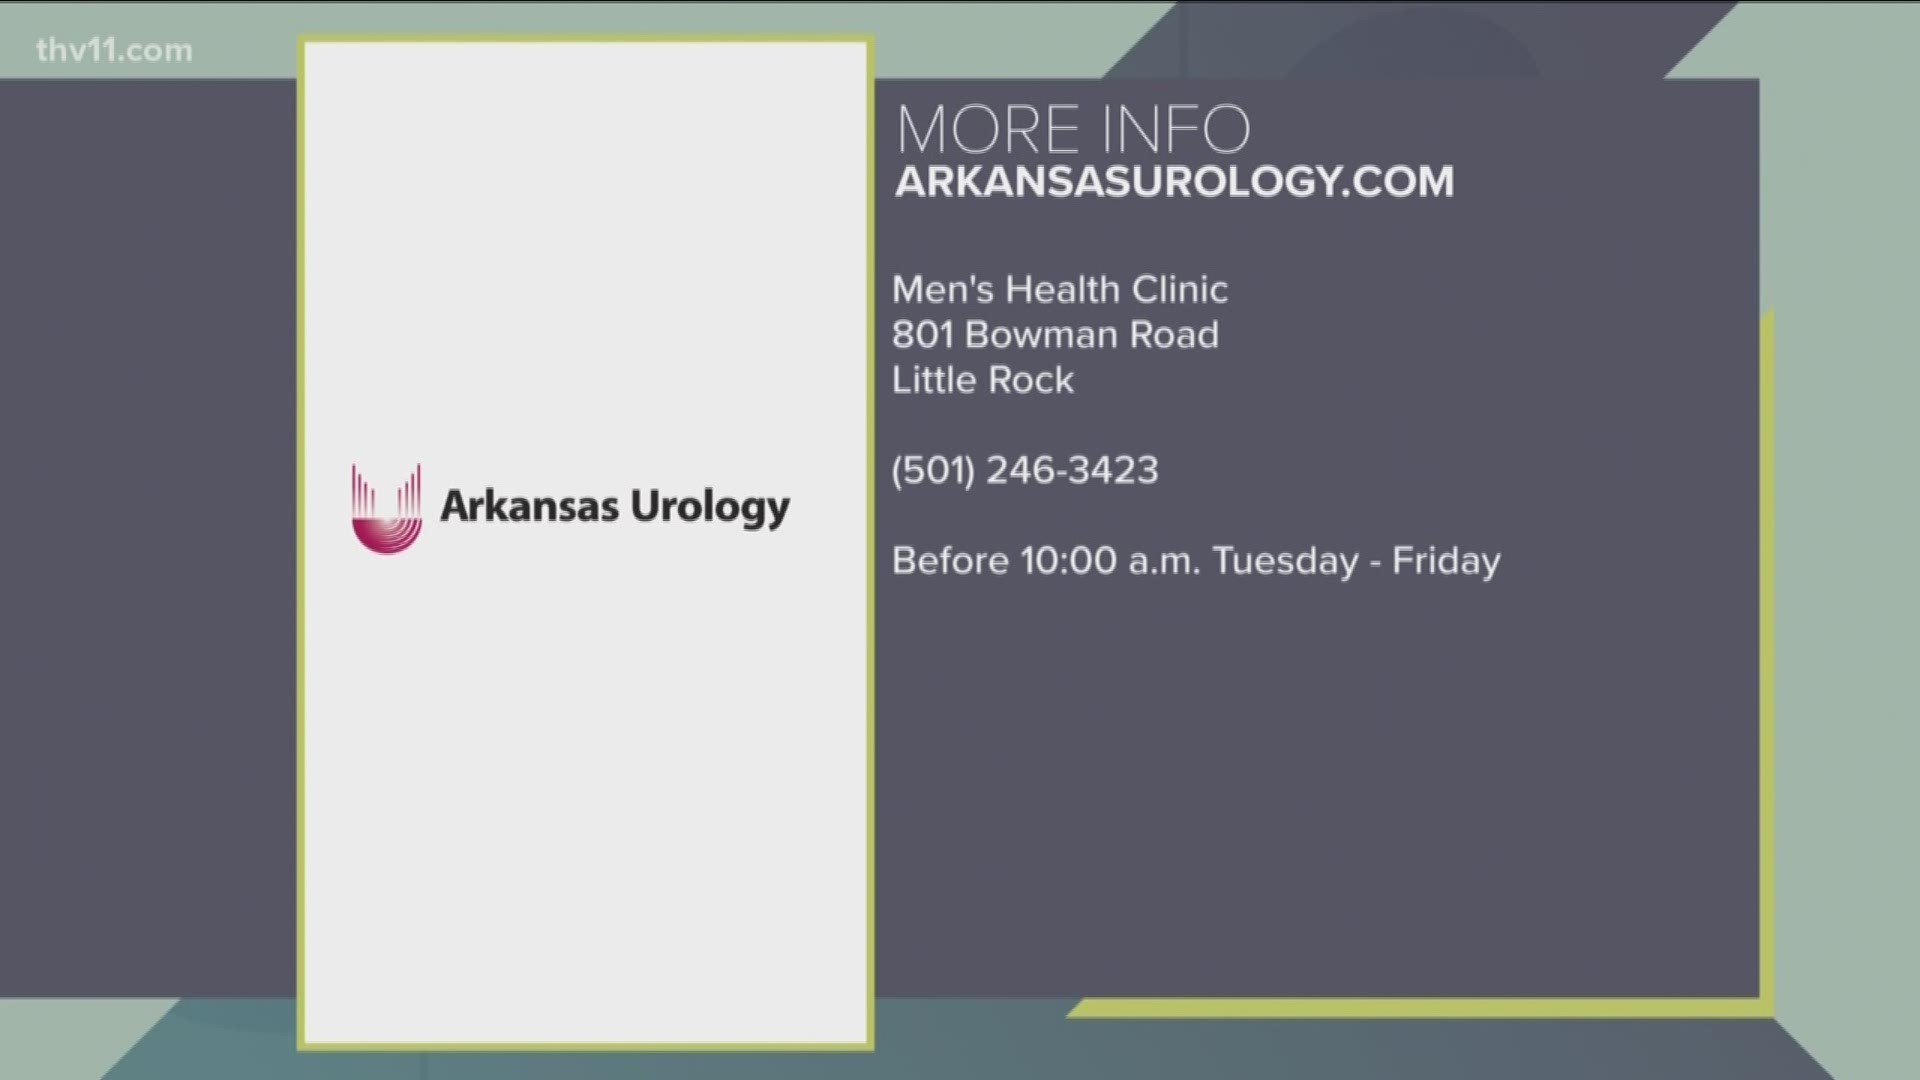 Most men hate going to the doctor. But getting checked out could save your life. Arkansas Urology Men's Health Clinic offering free health screenings for men.